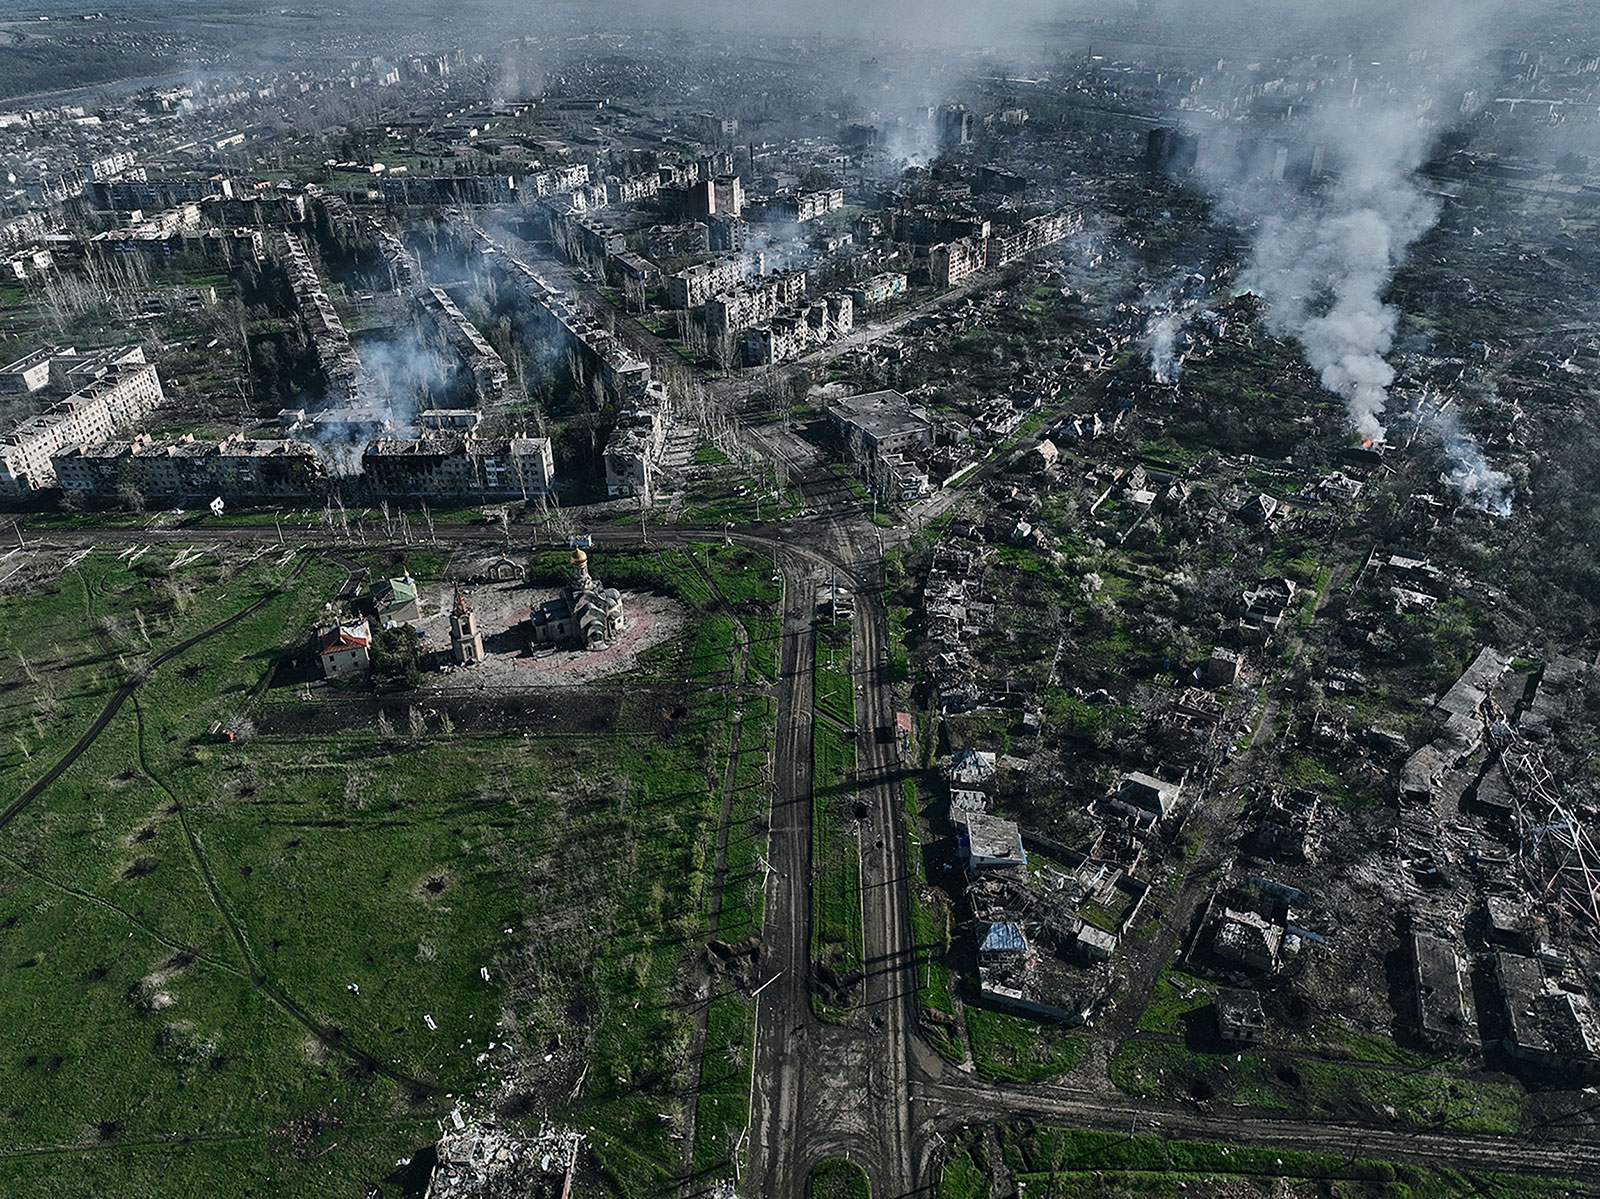 Smoke rises from buildings in this aerial view of Bakhmut, Ukraine on April 26.